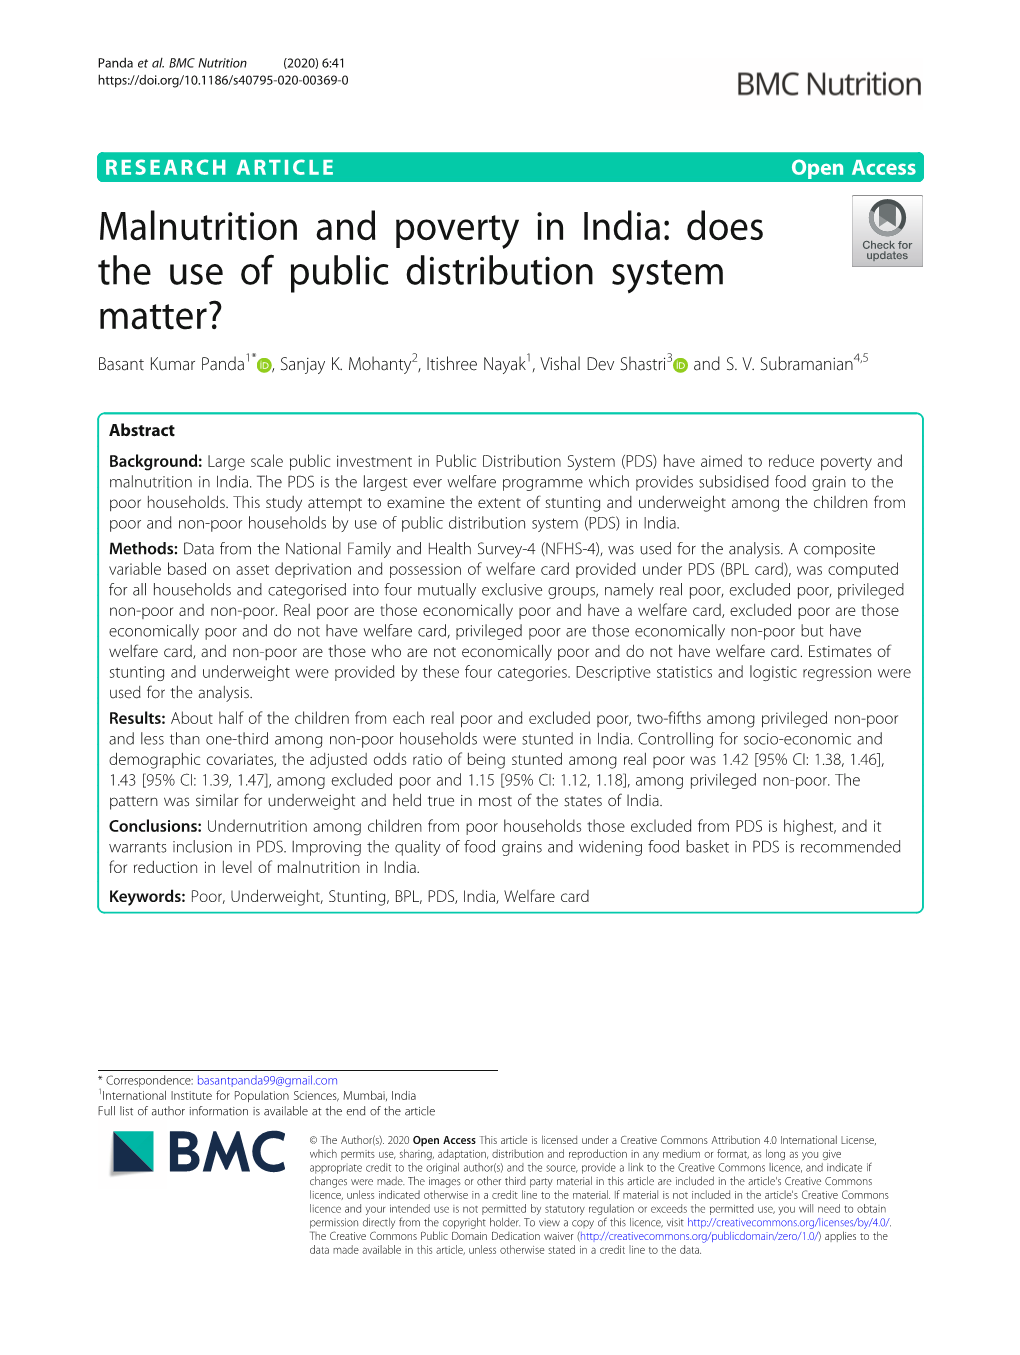 Malnutrition and Poverty in India: Does the Use of Public Distribution System Matter? Basant Kumar Panda1* , Sanjay K